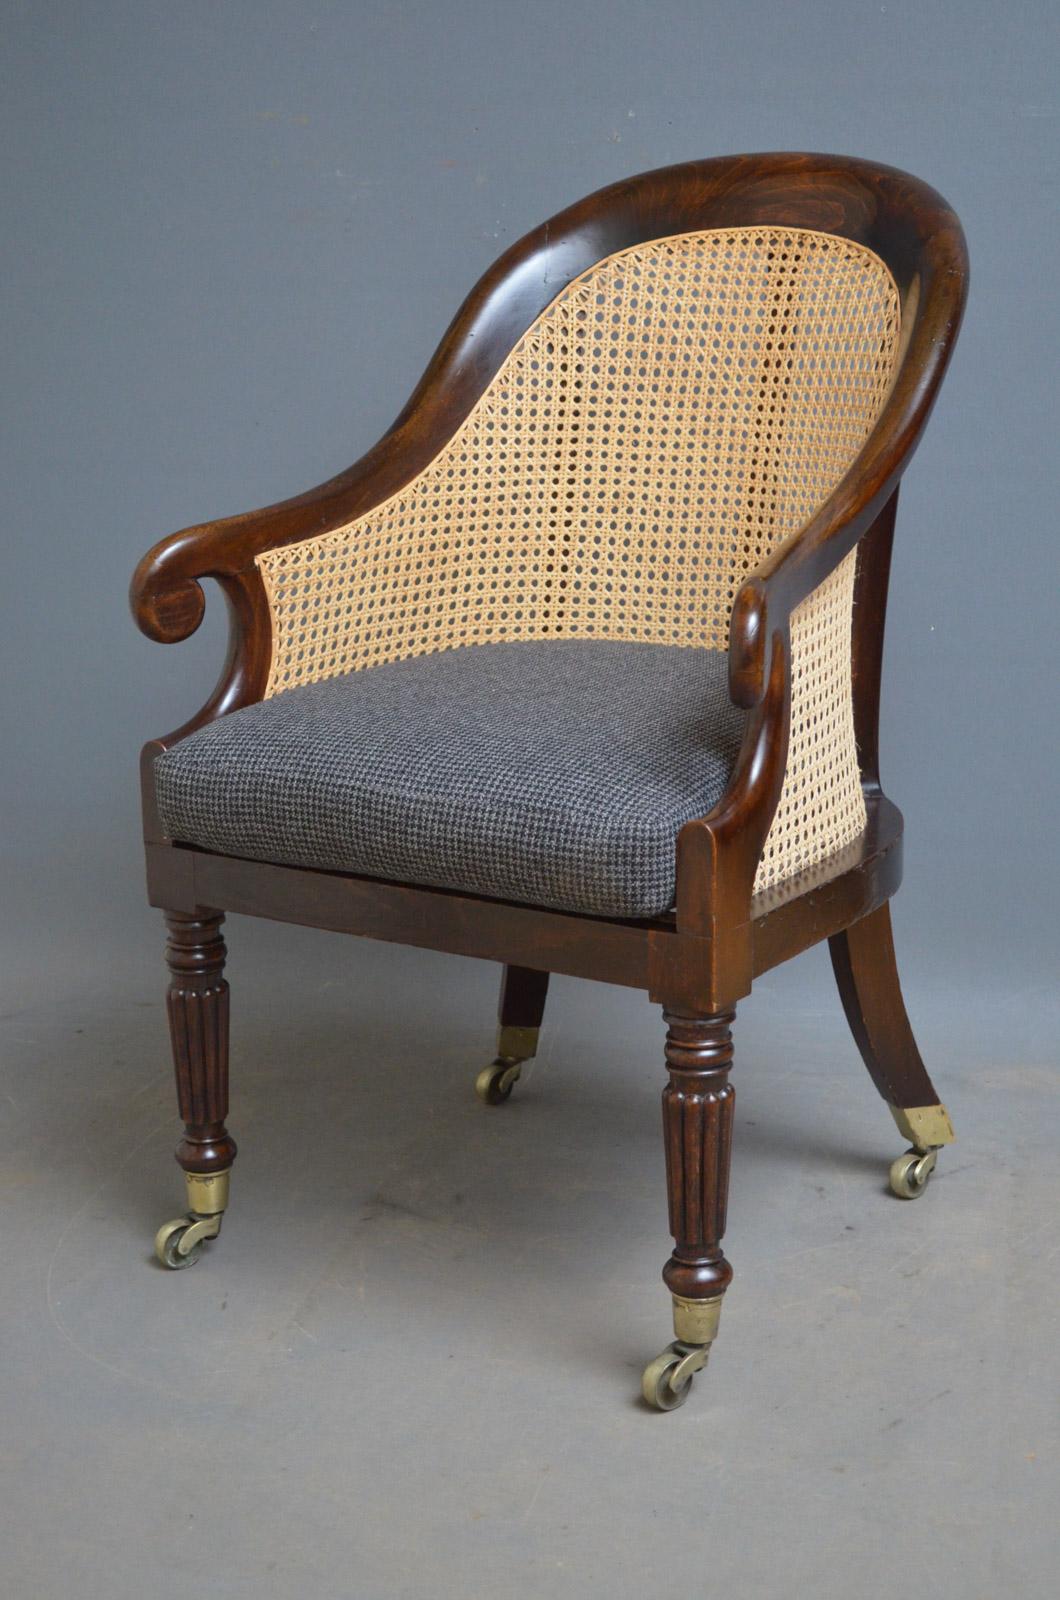 Sn4031 Georgian simulated rosewood bergère library chair, having curved top rail with scrolled arms caned back and seat with generous cushion, all standing on turned and fluted legs terminating in original brass castors. This antique armchair is in